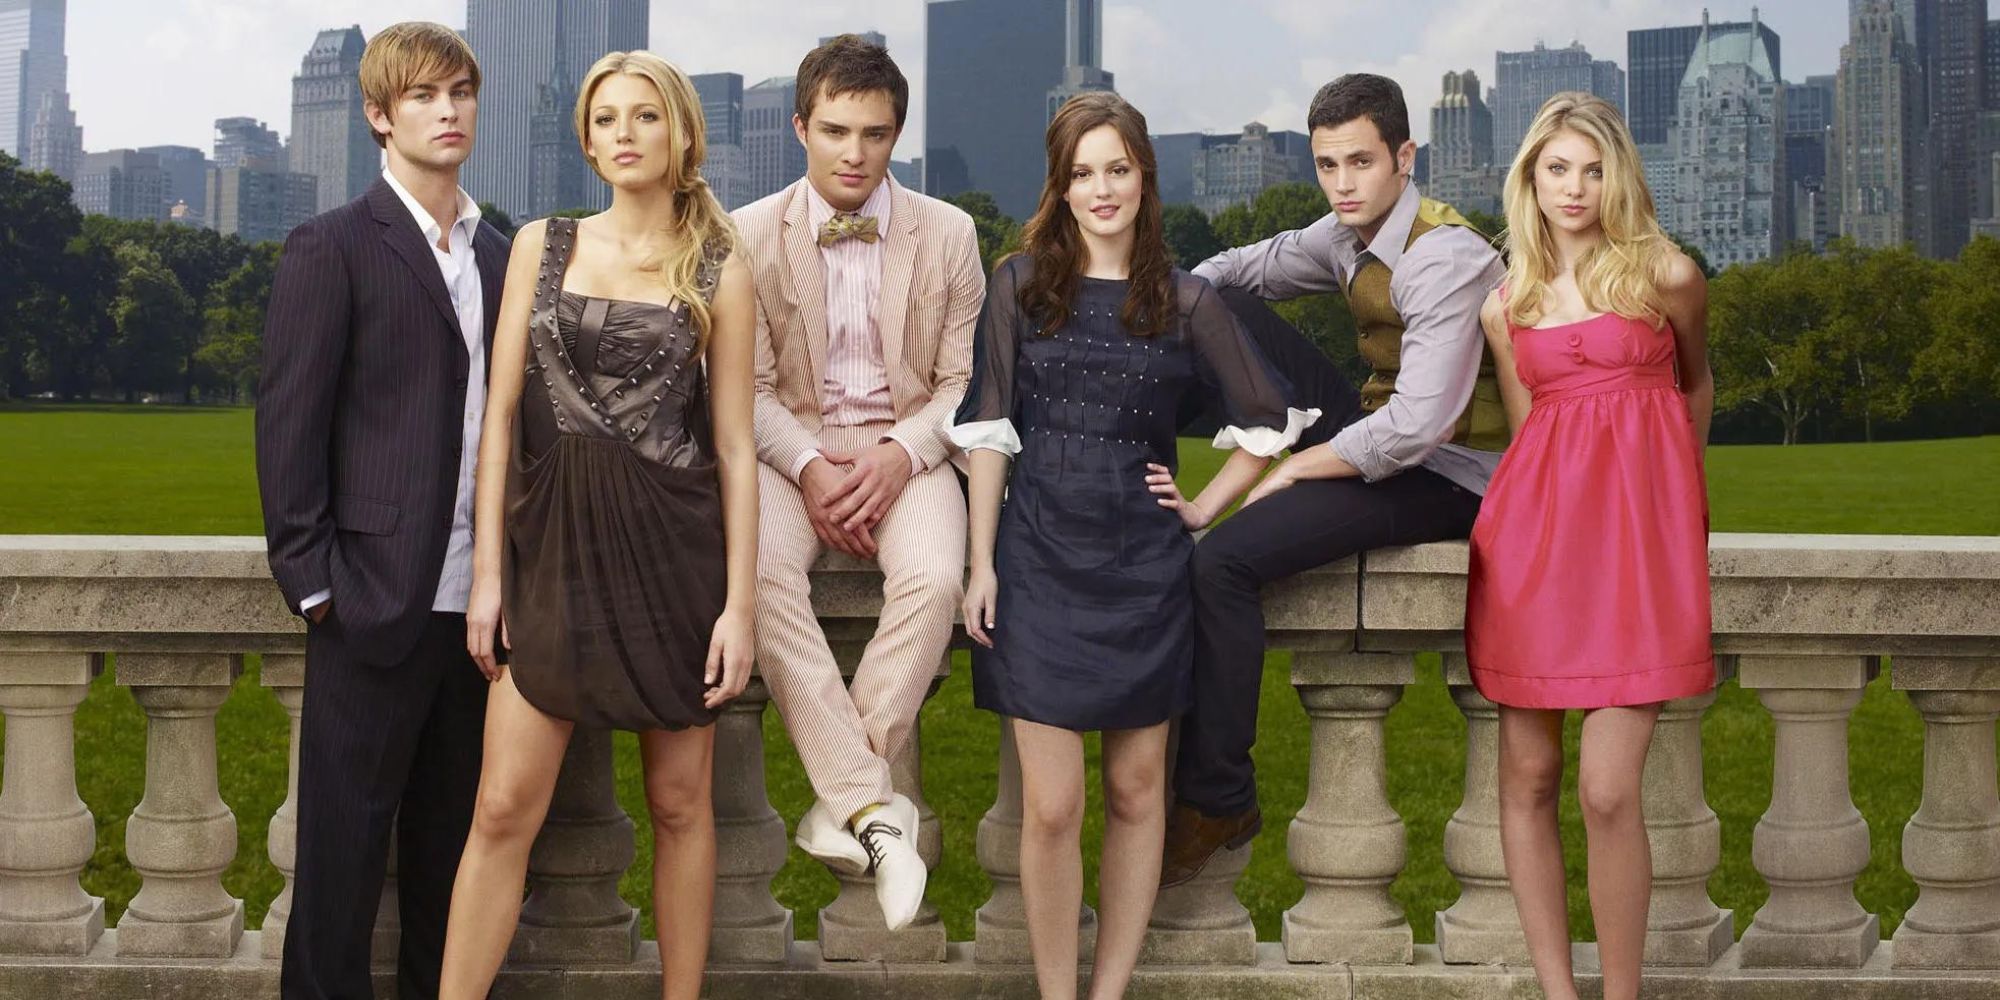 The cast of Gossip Girl stood together